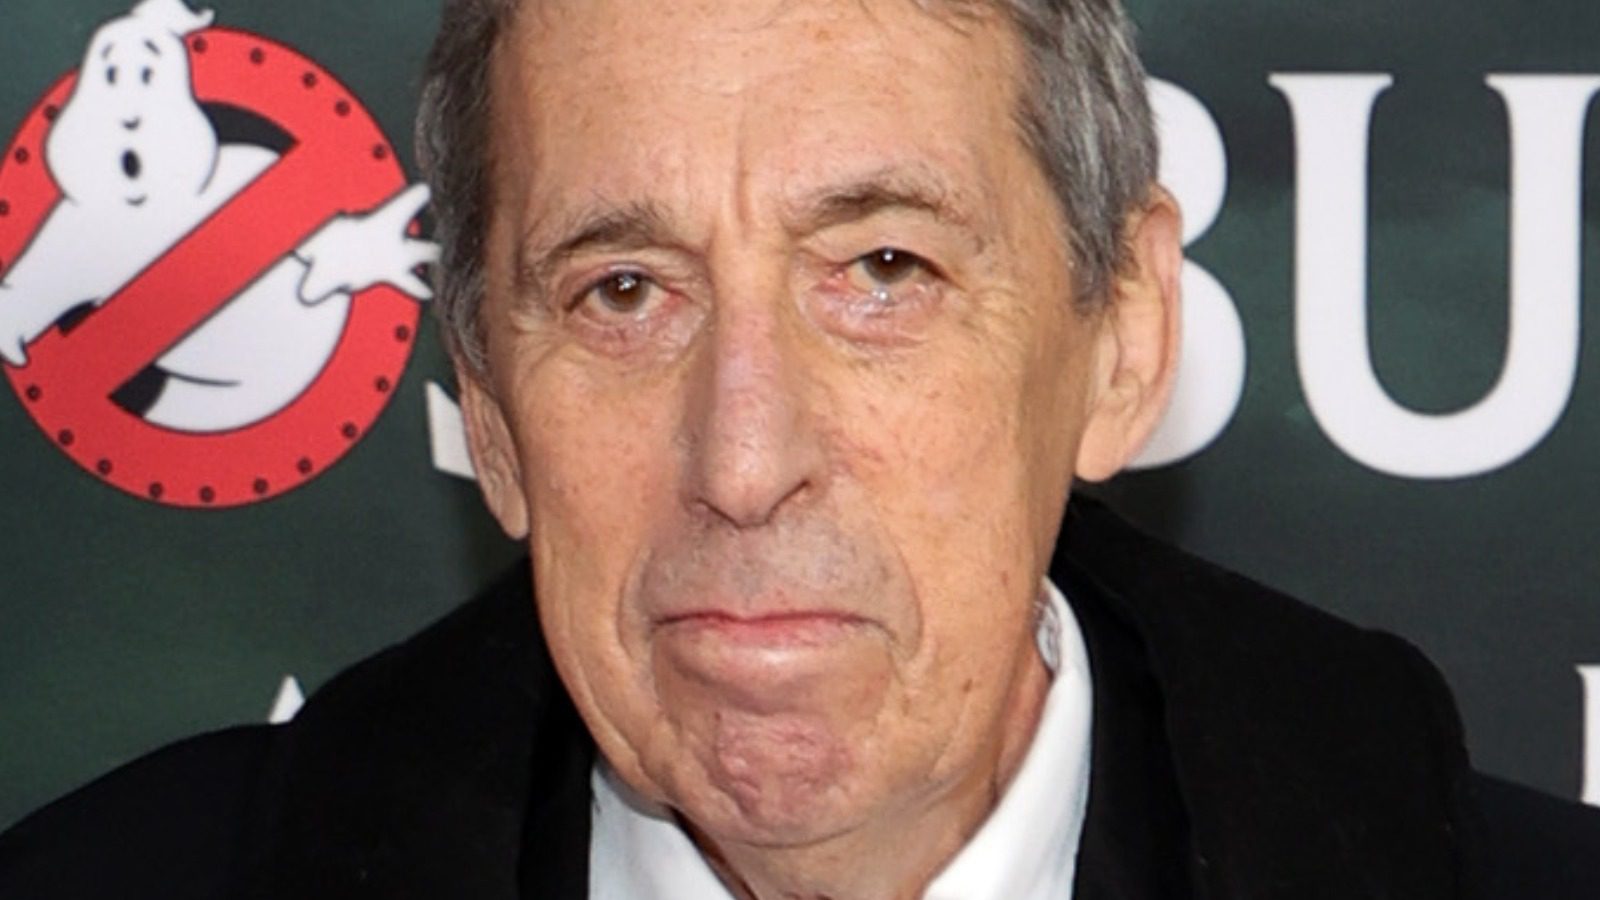 Ghostbusters Director Ivan Reitman Settles The Debate On Whether It's A Comedy Or Horror Film